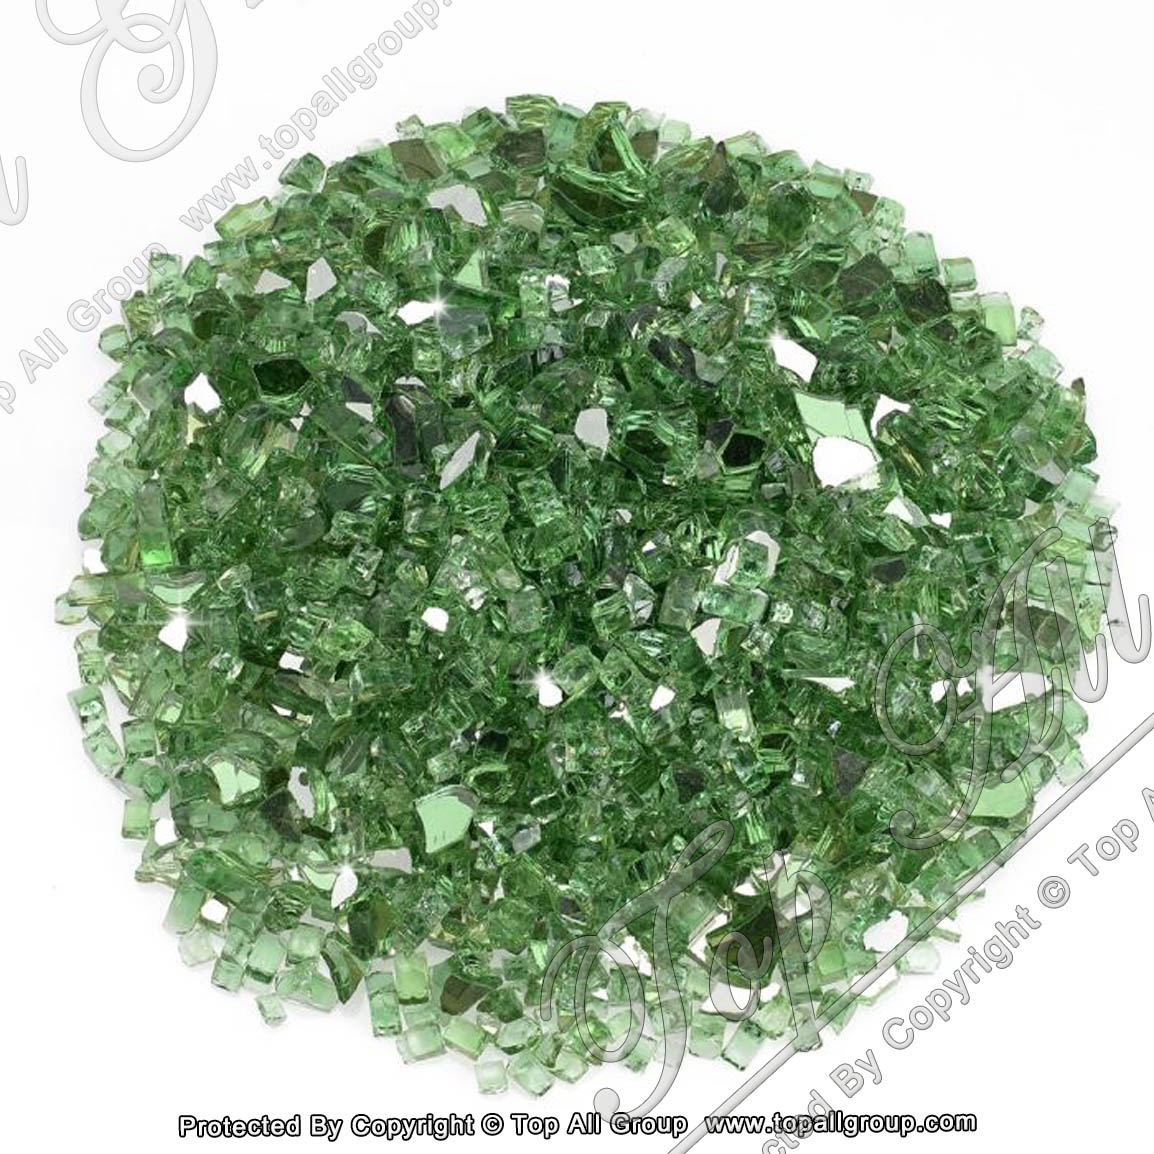 1/4” Evergreen Reflective Fire Glass detail pictures